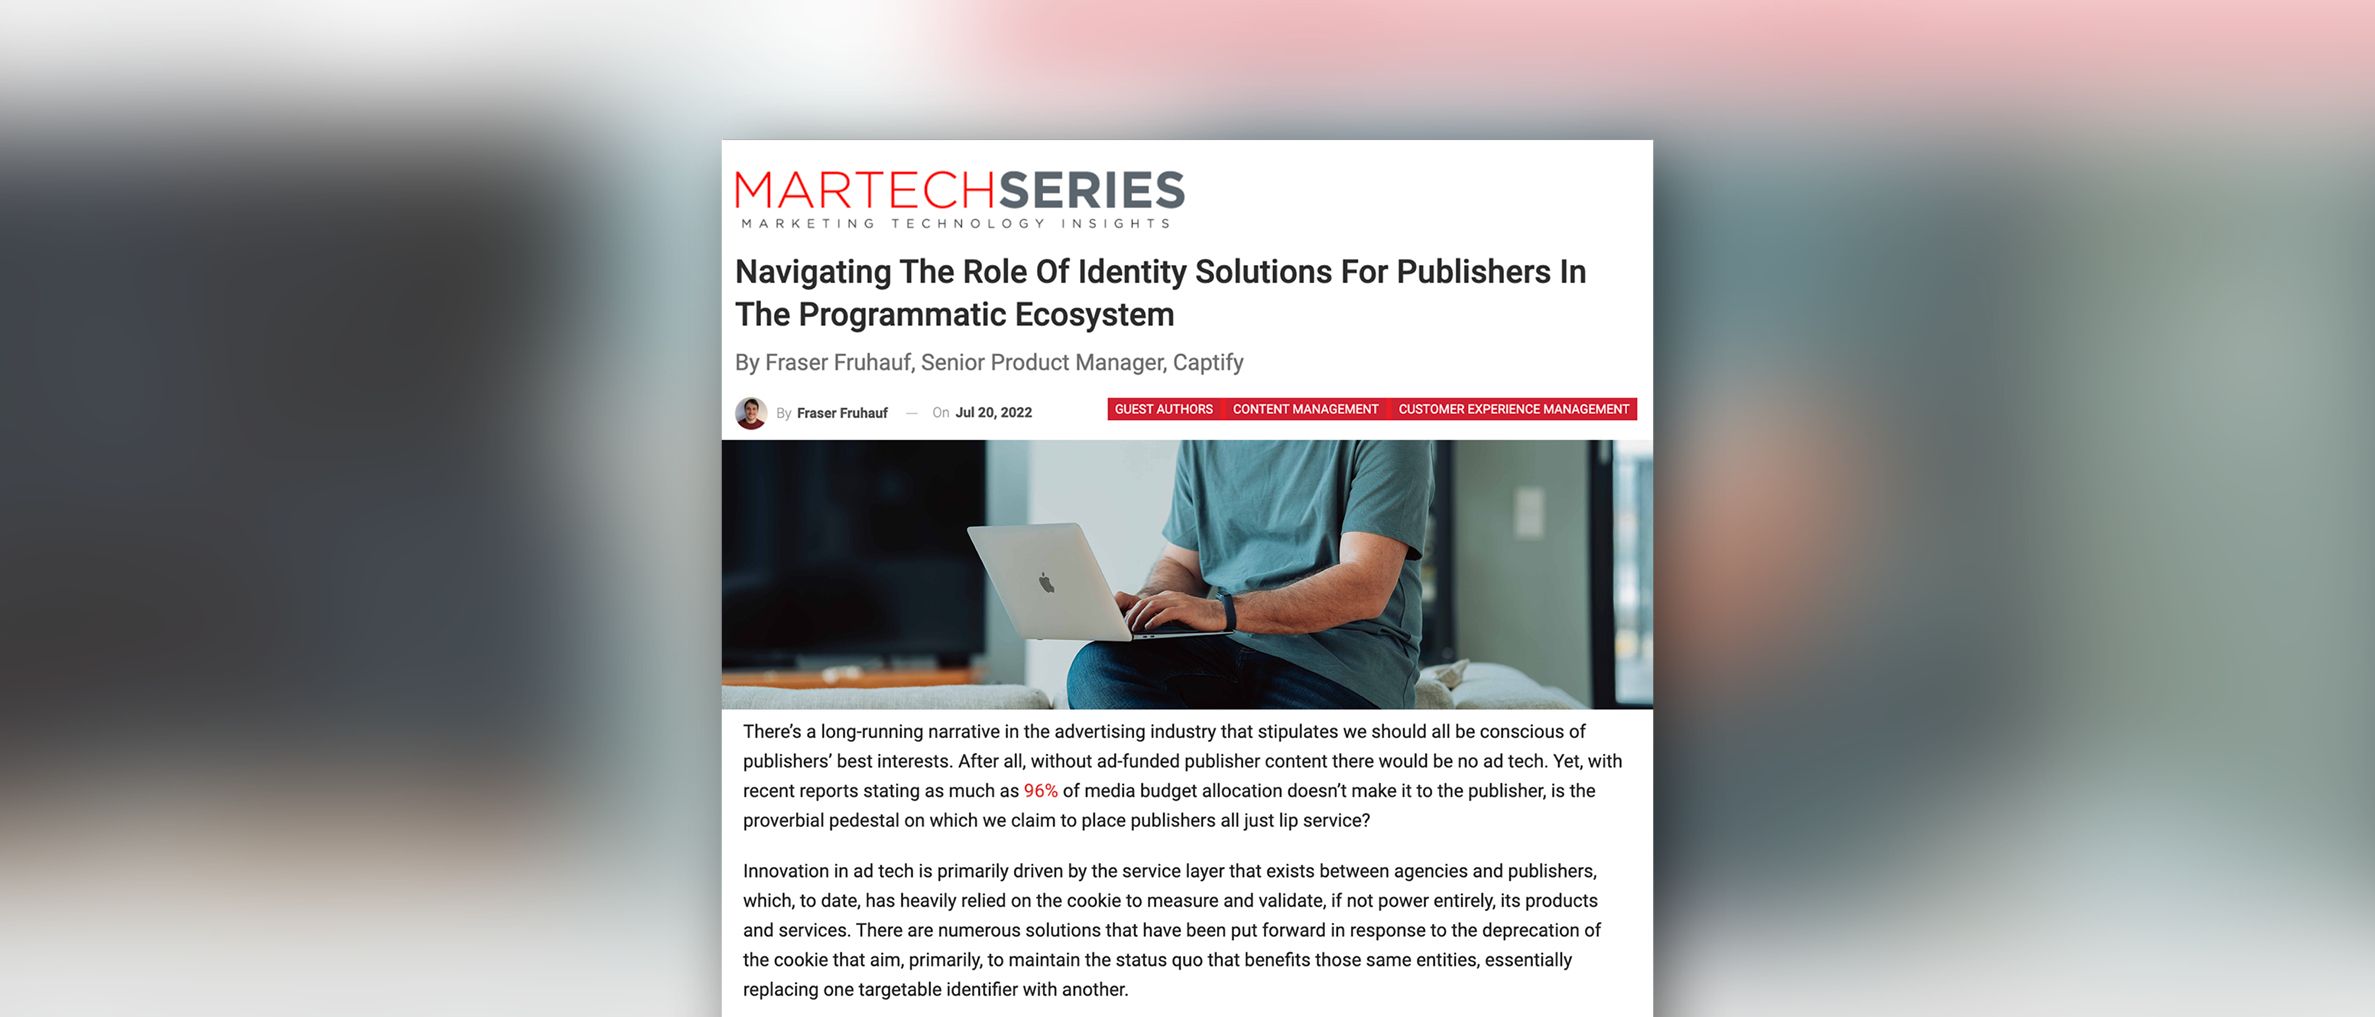 MarTech Series: Navigating The Role Of Identity Solutions For Publishers In The Programmatic Ecosystem